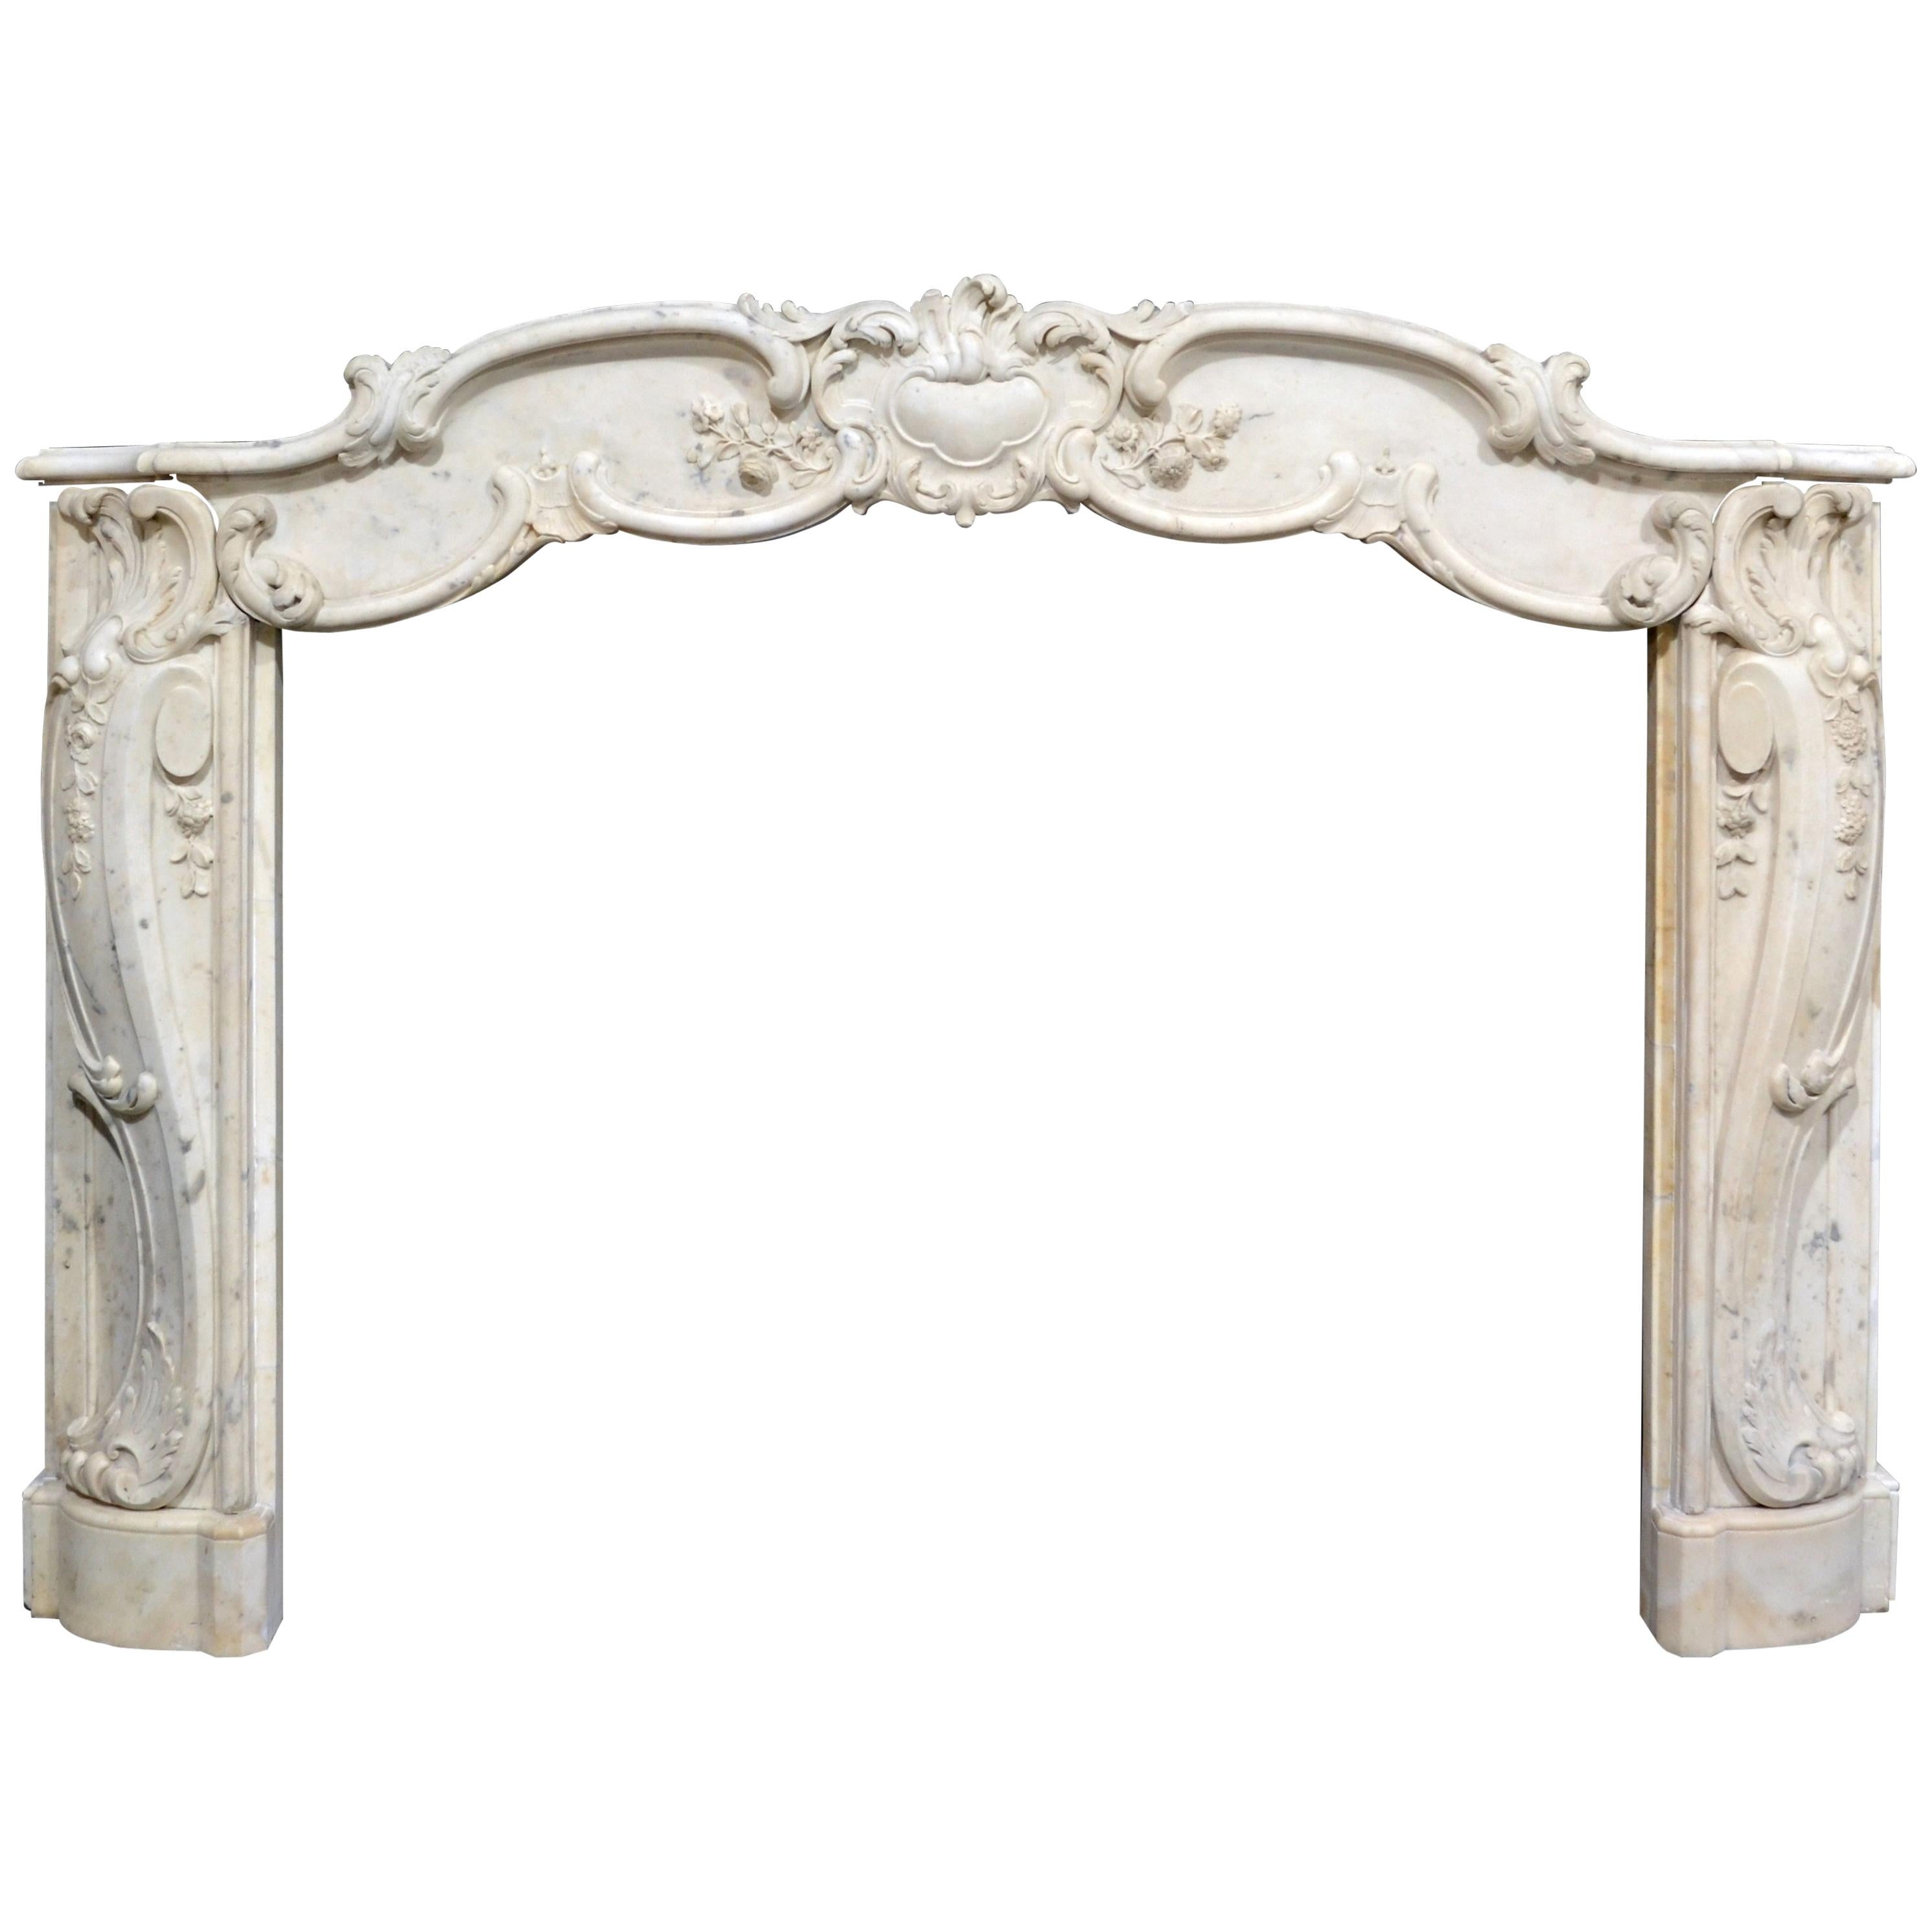 Early 19th Century French Rococo Mantelpiece